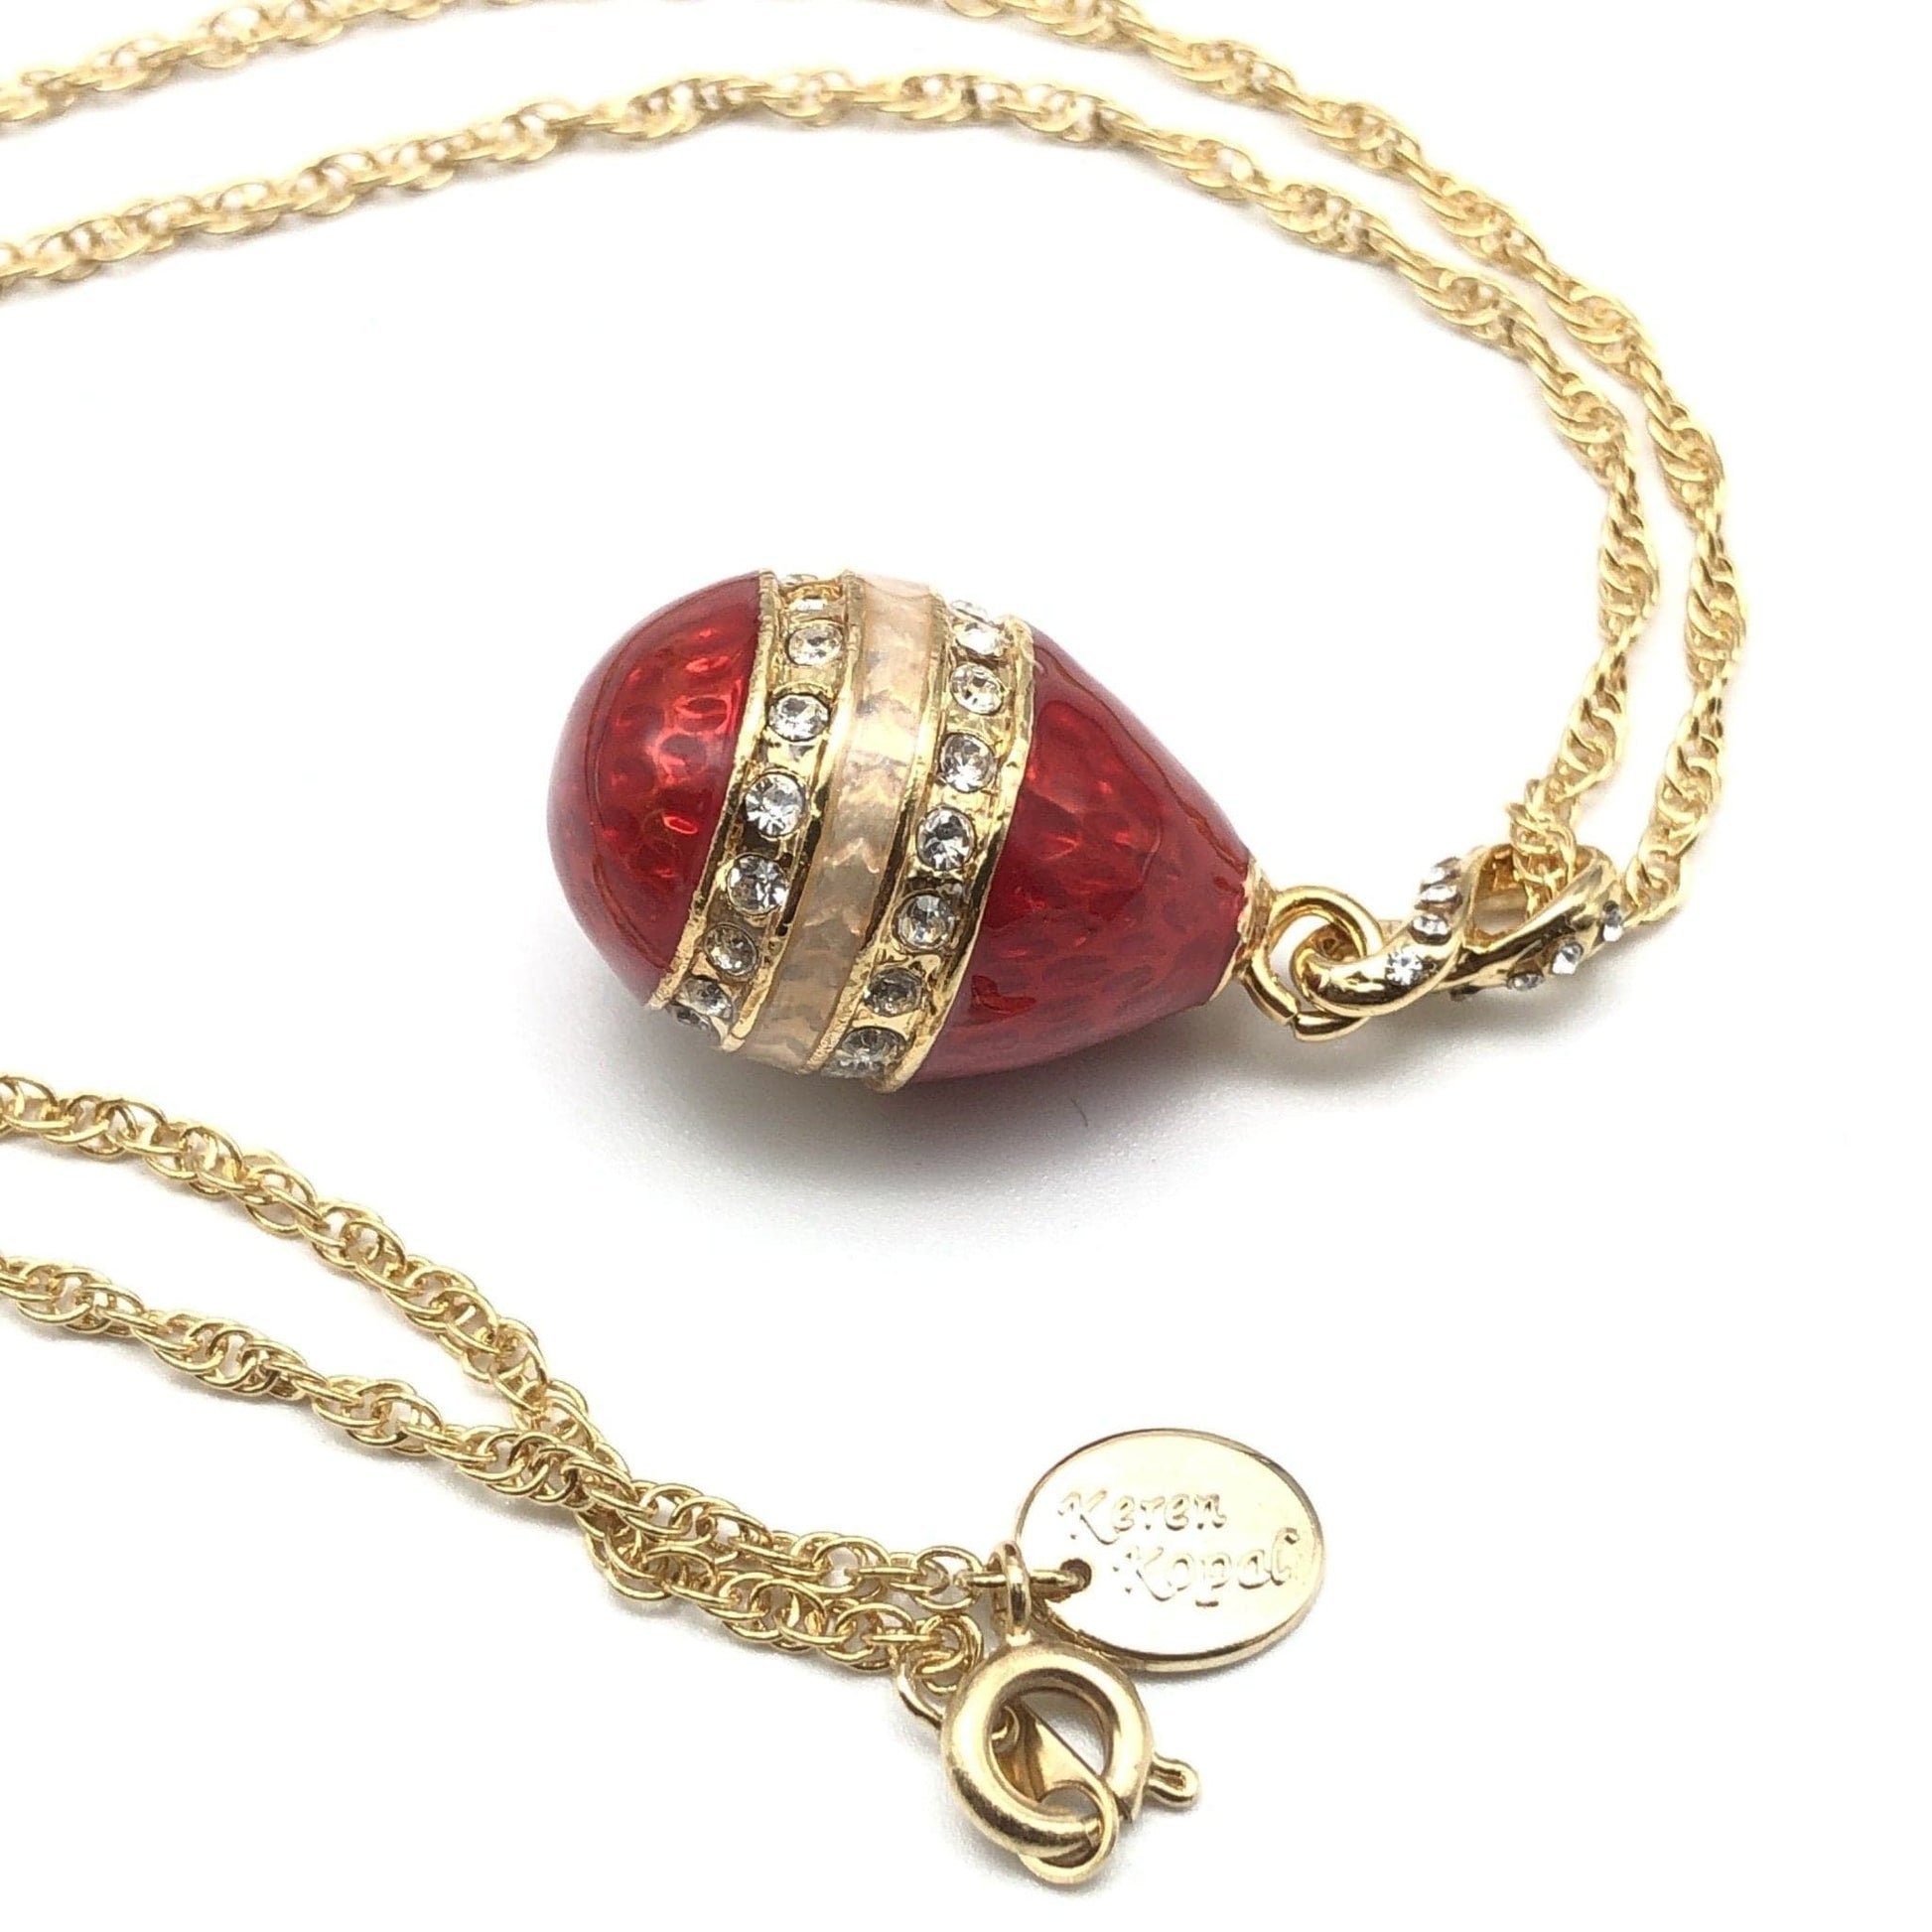 Red Egg Pendant Necklace | Treasures of my HeART